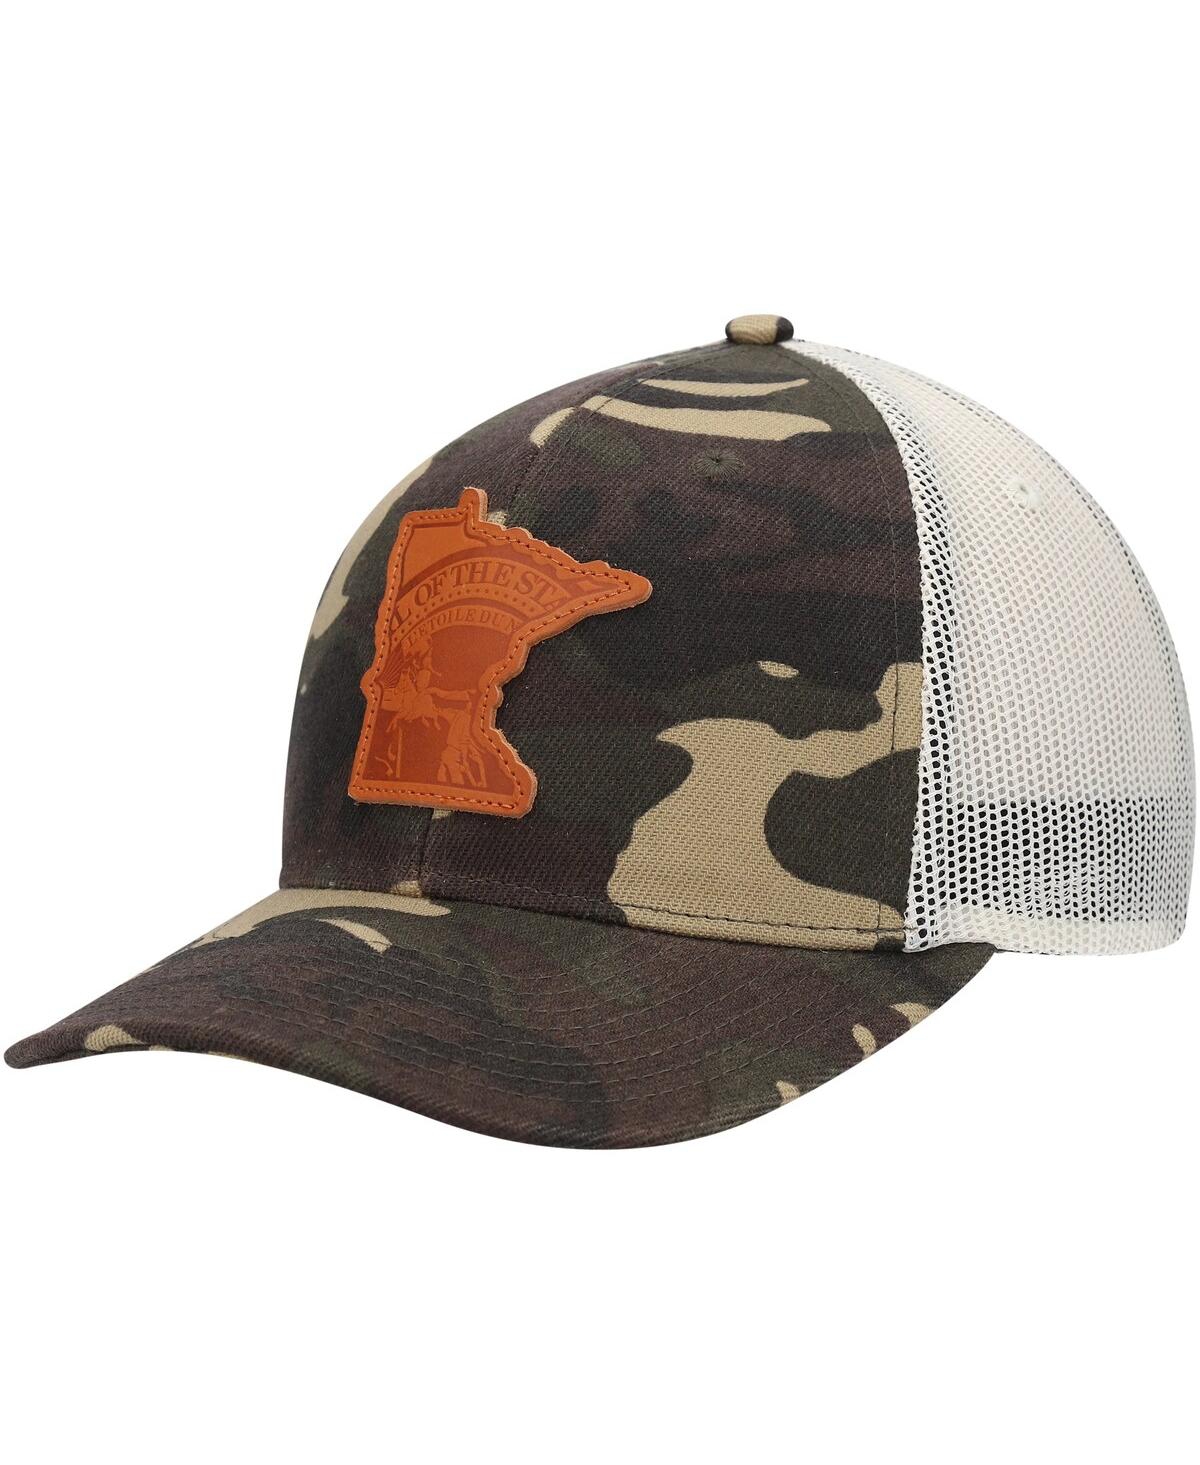 Shop Local Crowns Men's  Camo Minnesota Icon Woodland State Patch Trucker Snapback Hat